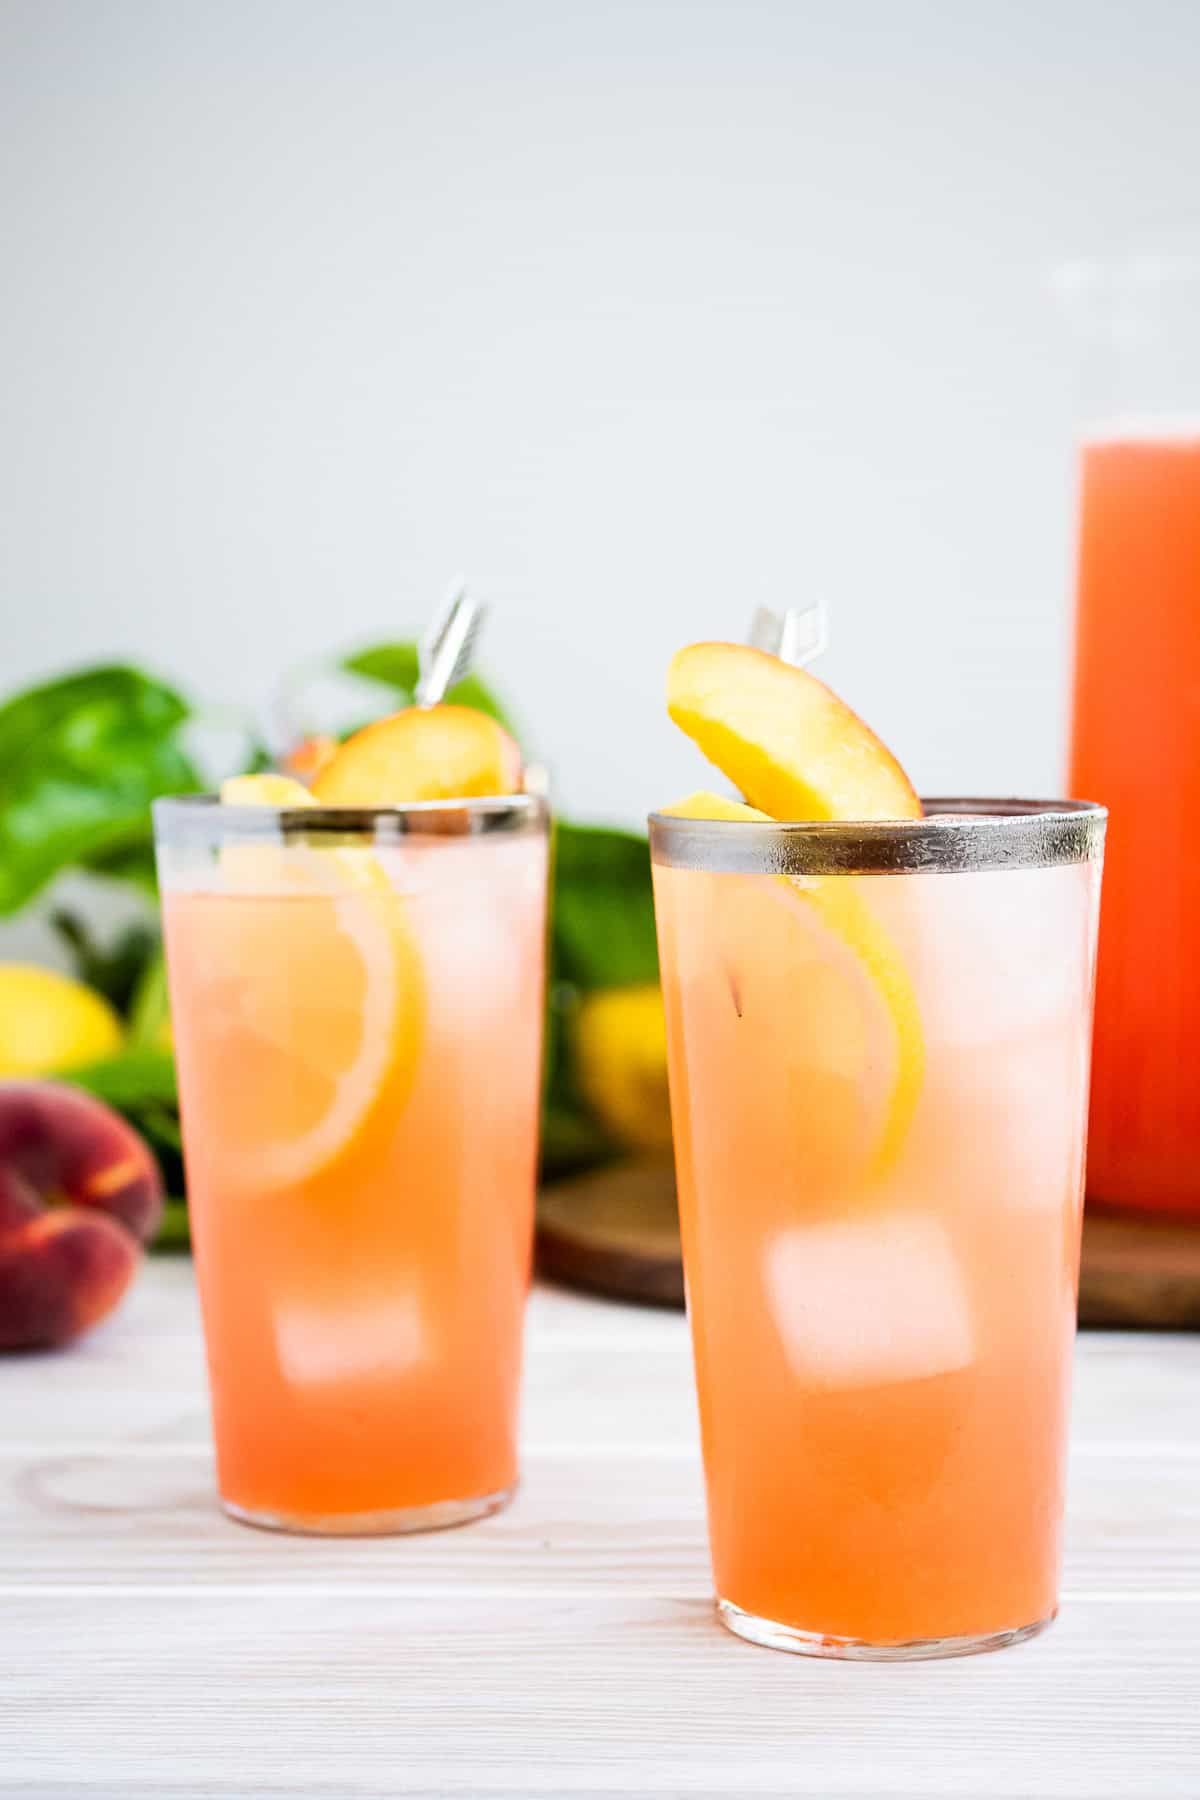 A close up of two glasses of peach lemonade in front of a pitcher of the lemonade on a wooden tray, as well as some peaches and lemons.